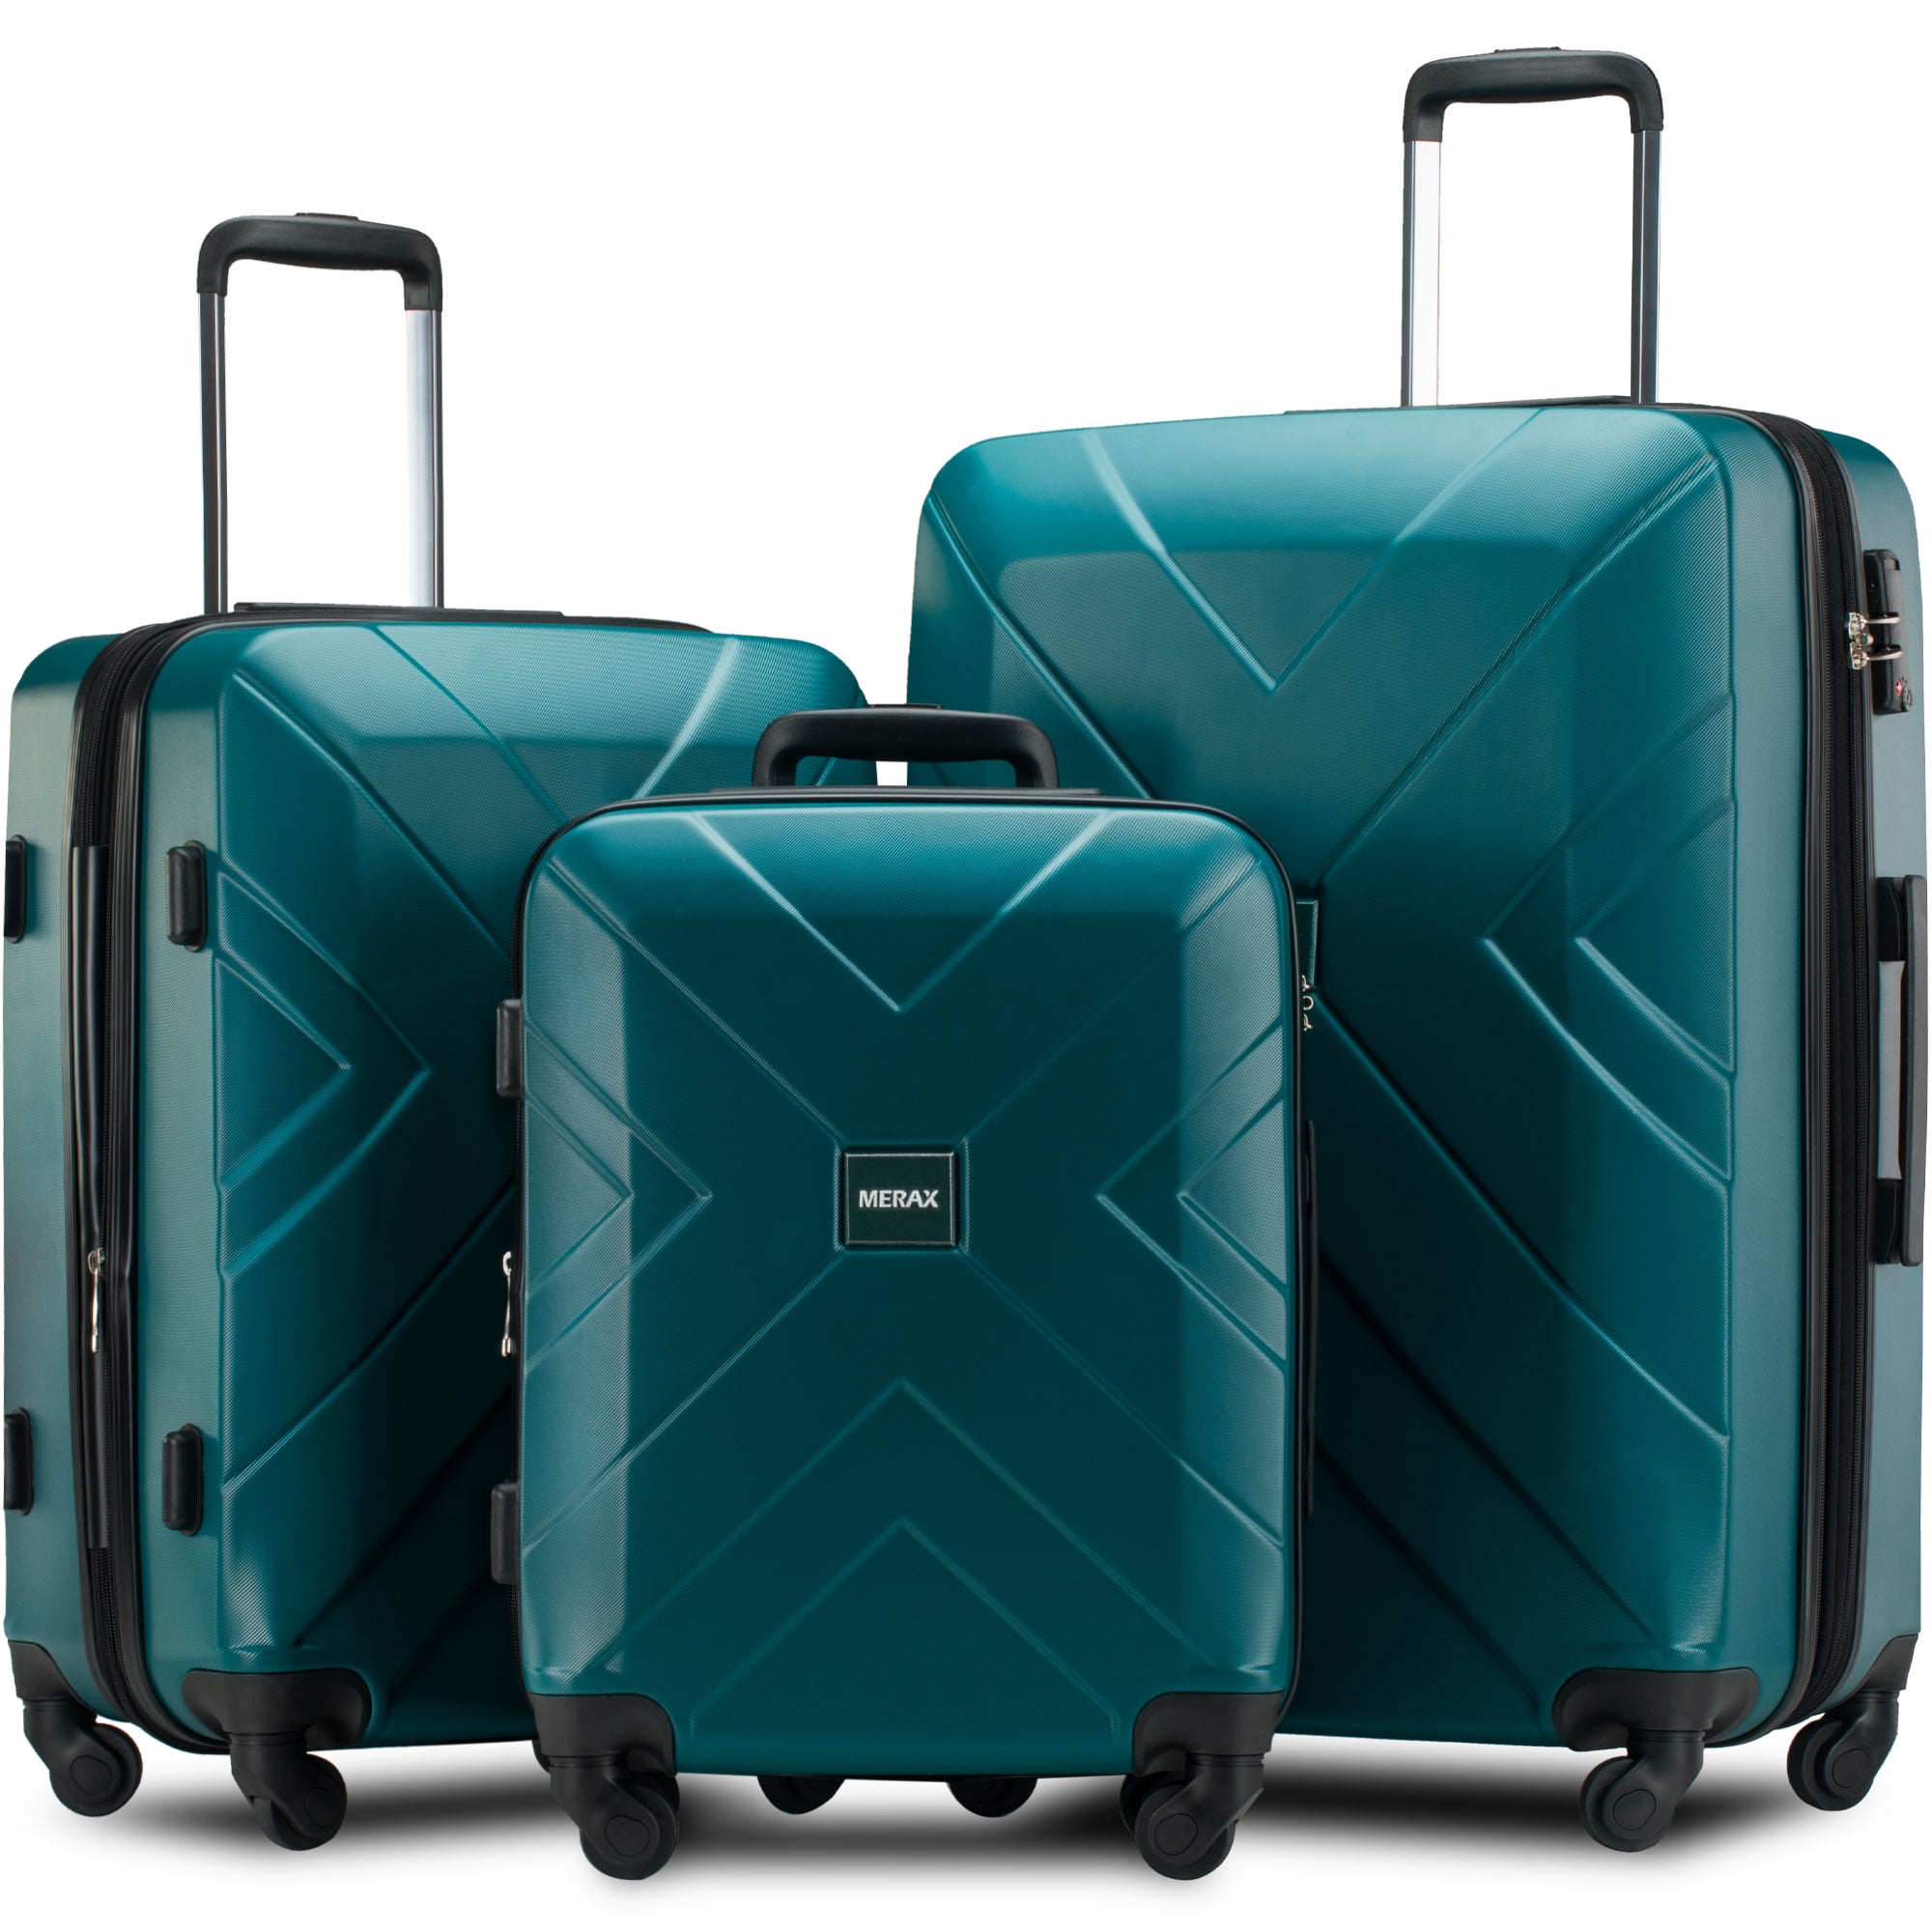 Segmart - Clearance! 3 Piece Carry on Luggage Sets, Lightweight ...